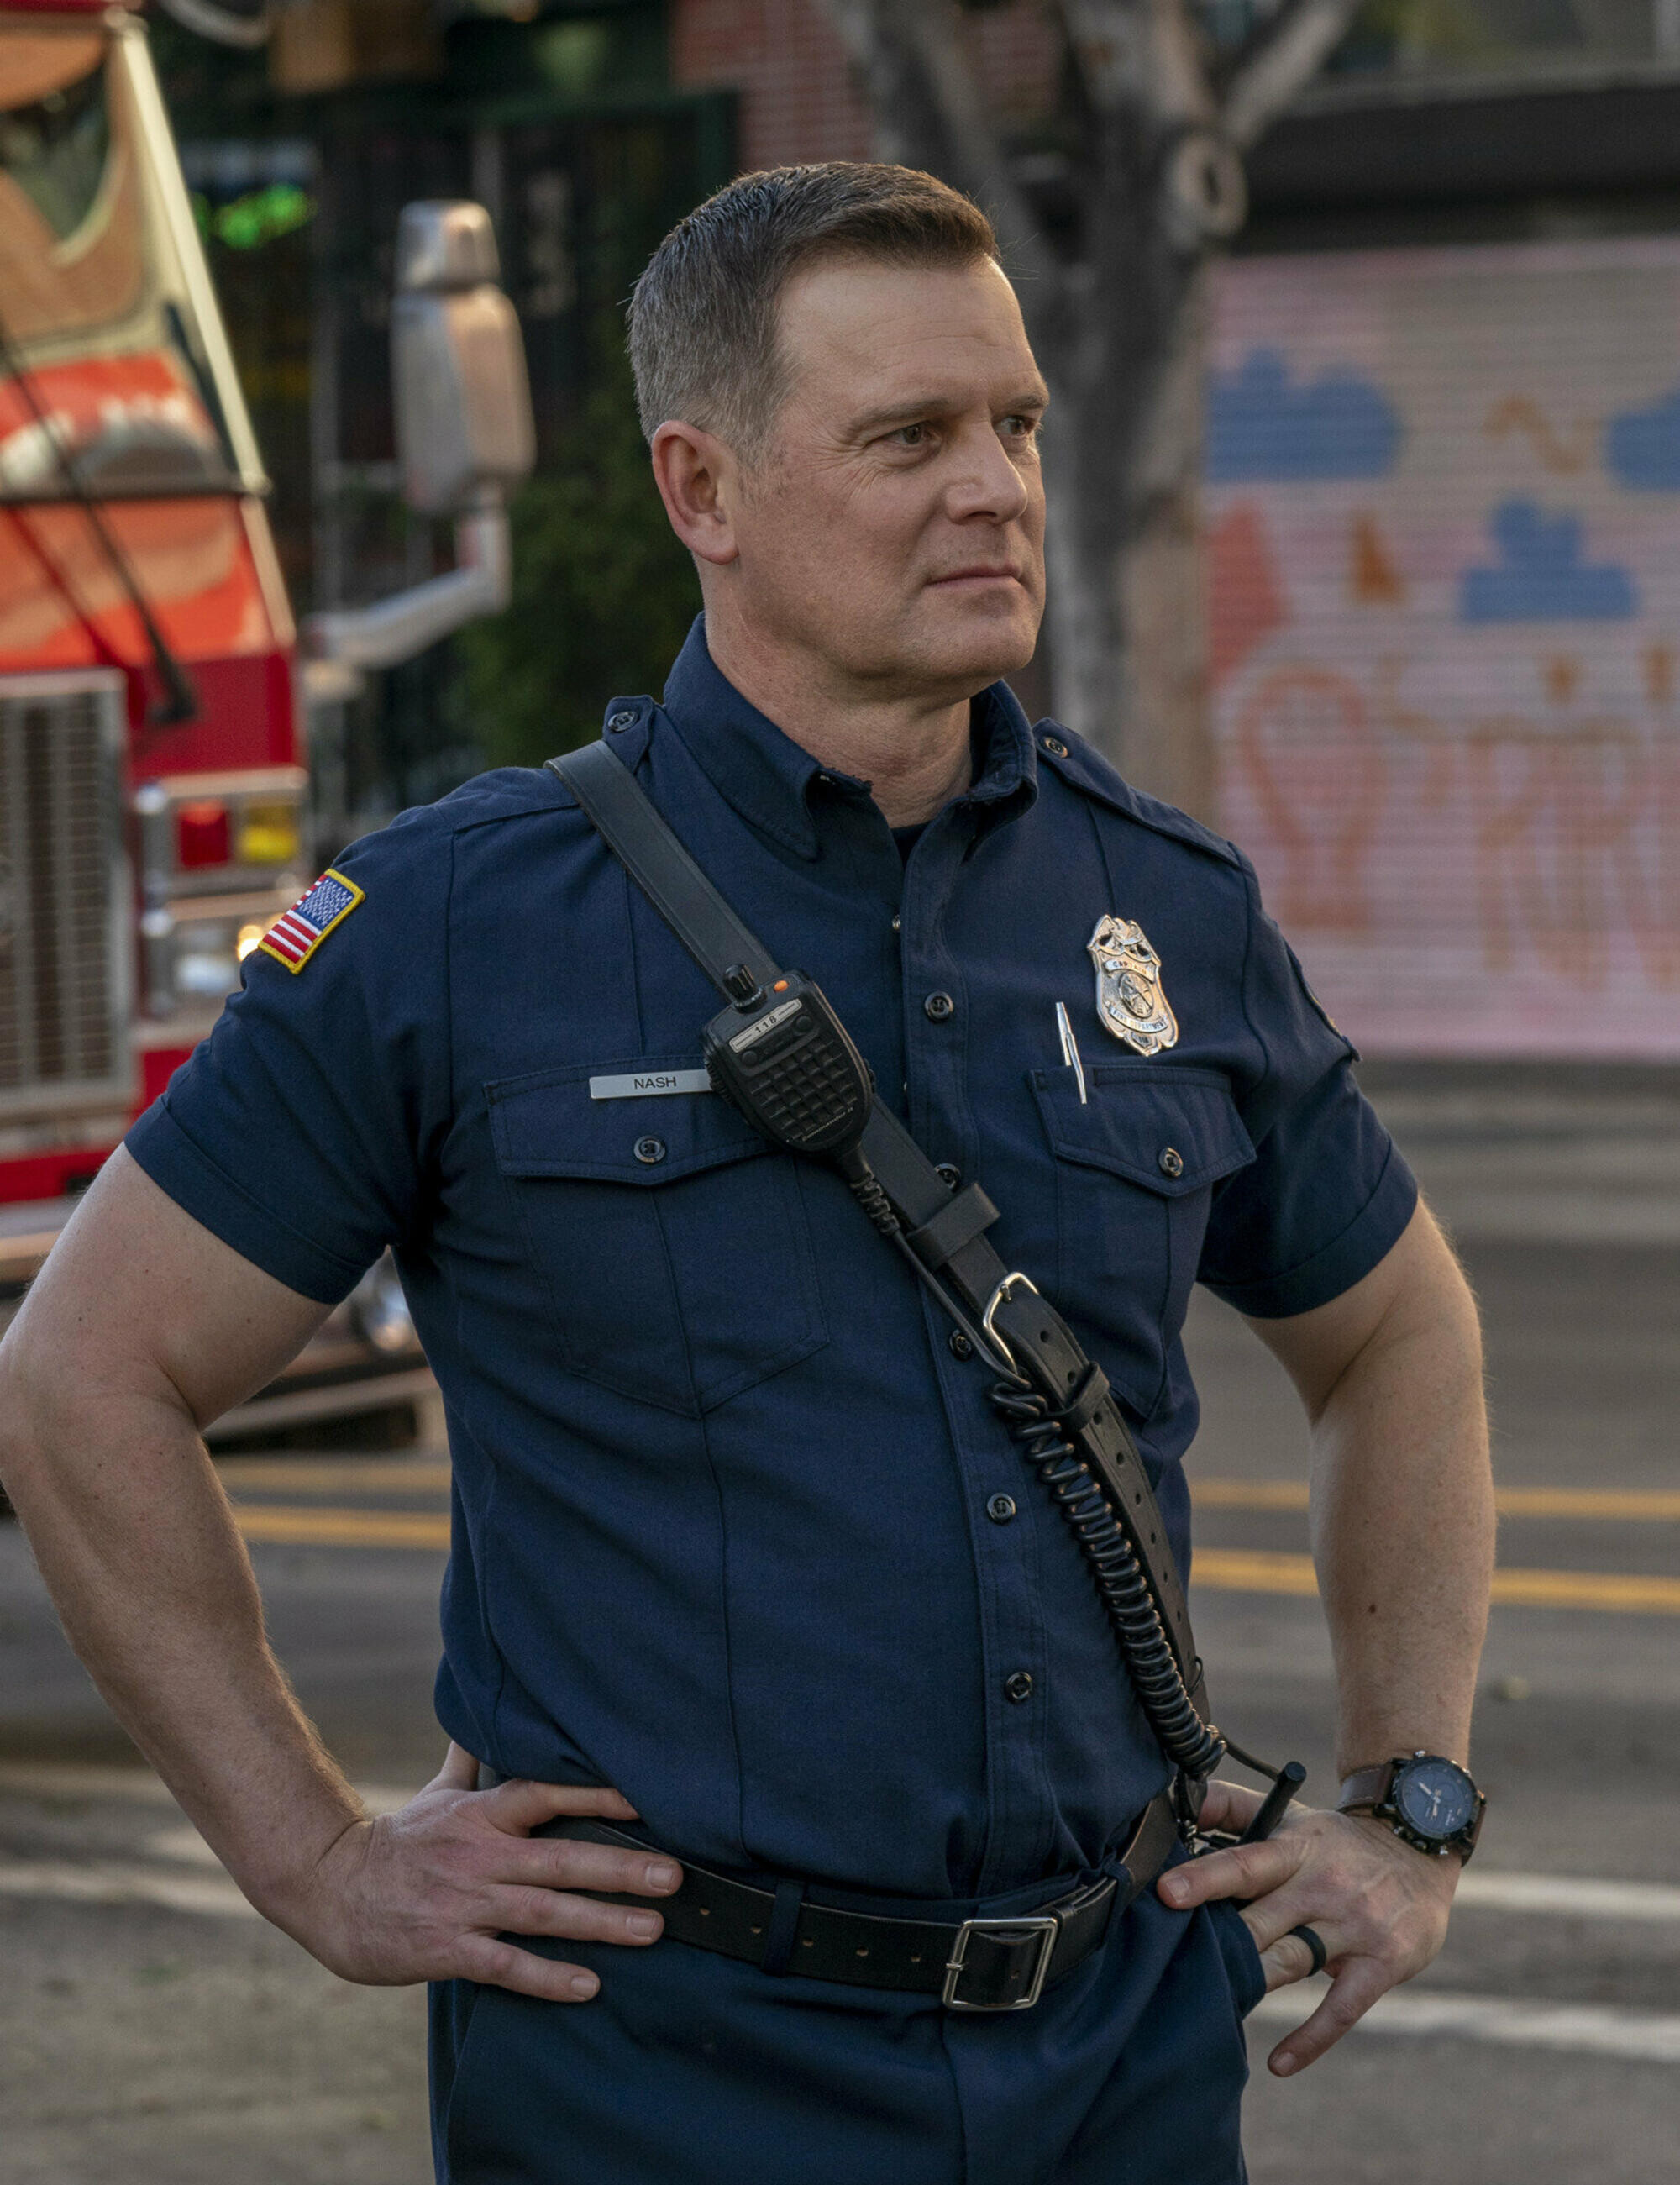 9-1-1 (TV Series): Robert Nash, Firefighter Captain, Peter Krause, American Actor, Director, And Producer, Season 3 Episode 8. 2000x2610 HD Background.